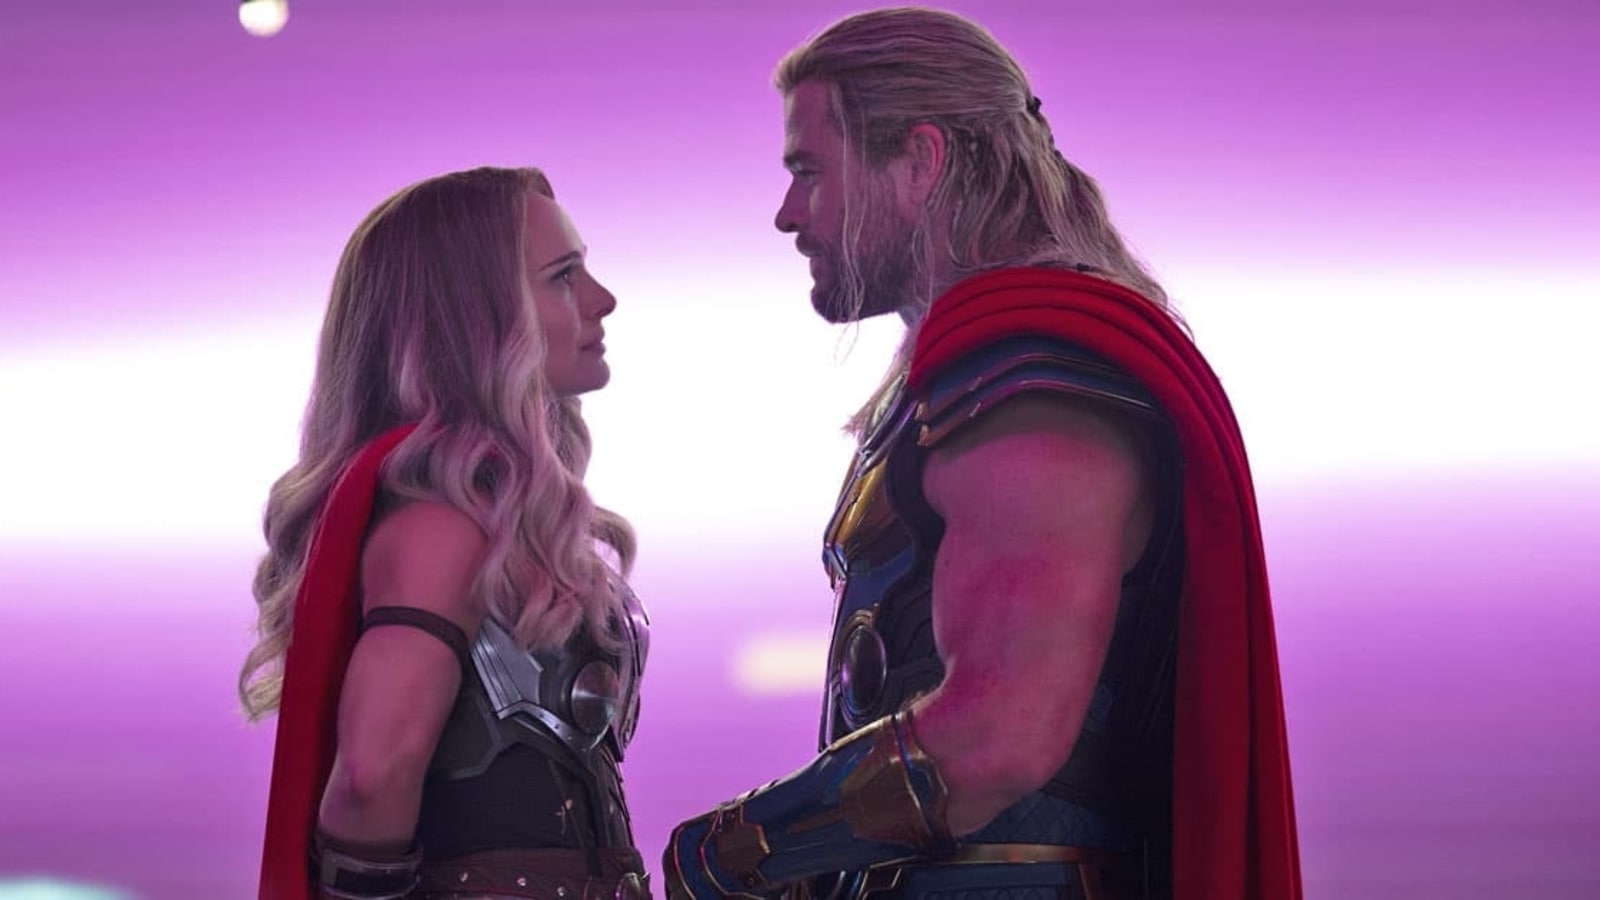 Chris Hemsworth didn’t eat meat to kiss vegan Natalie Portman in Thor Love and Thunder: ‘And he eats it every half hour’